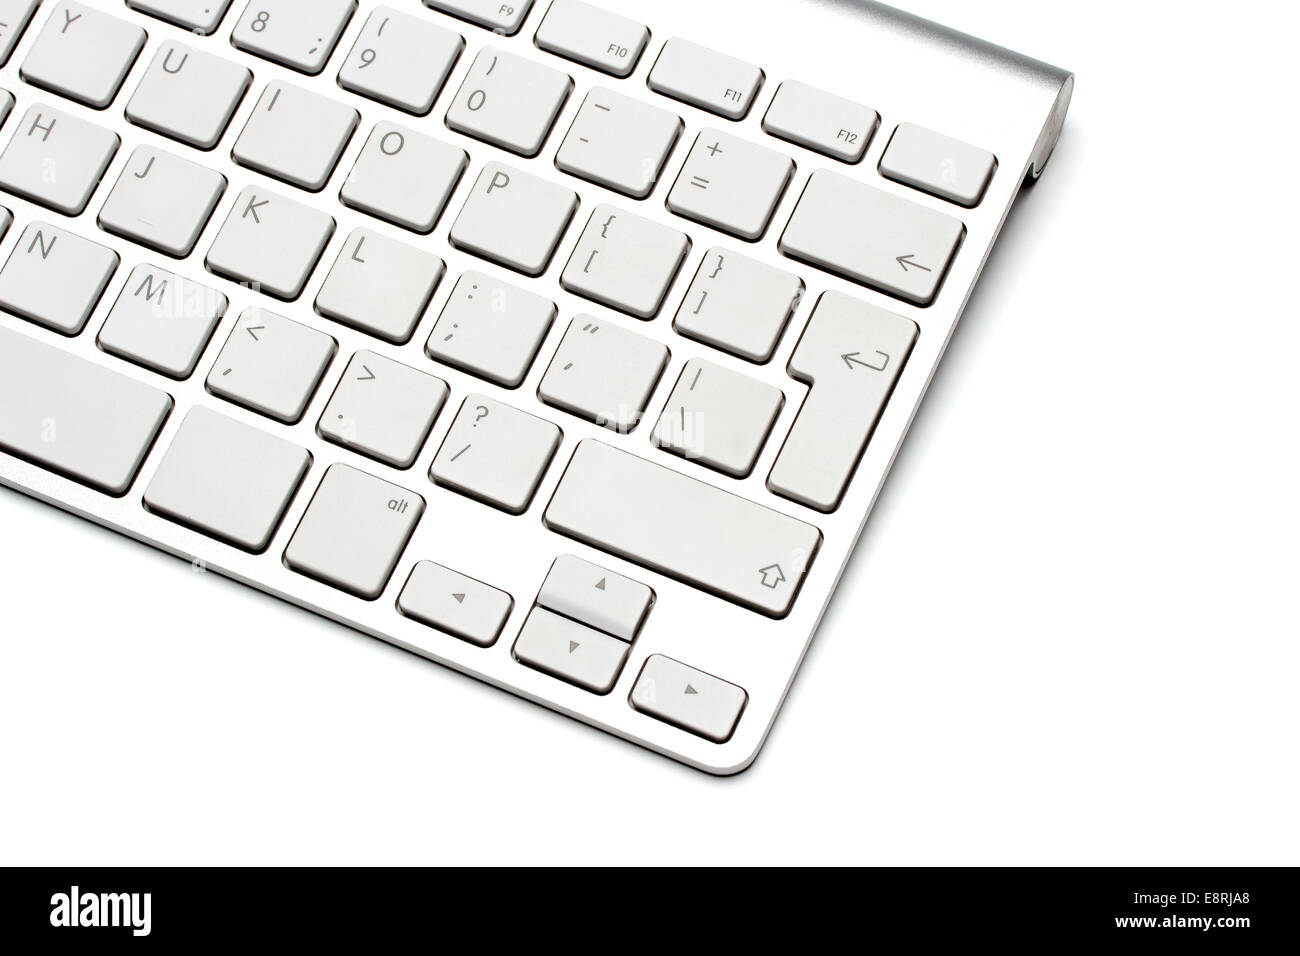 Keyboard on a white background, close-up Stock Photo